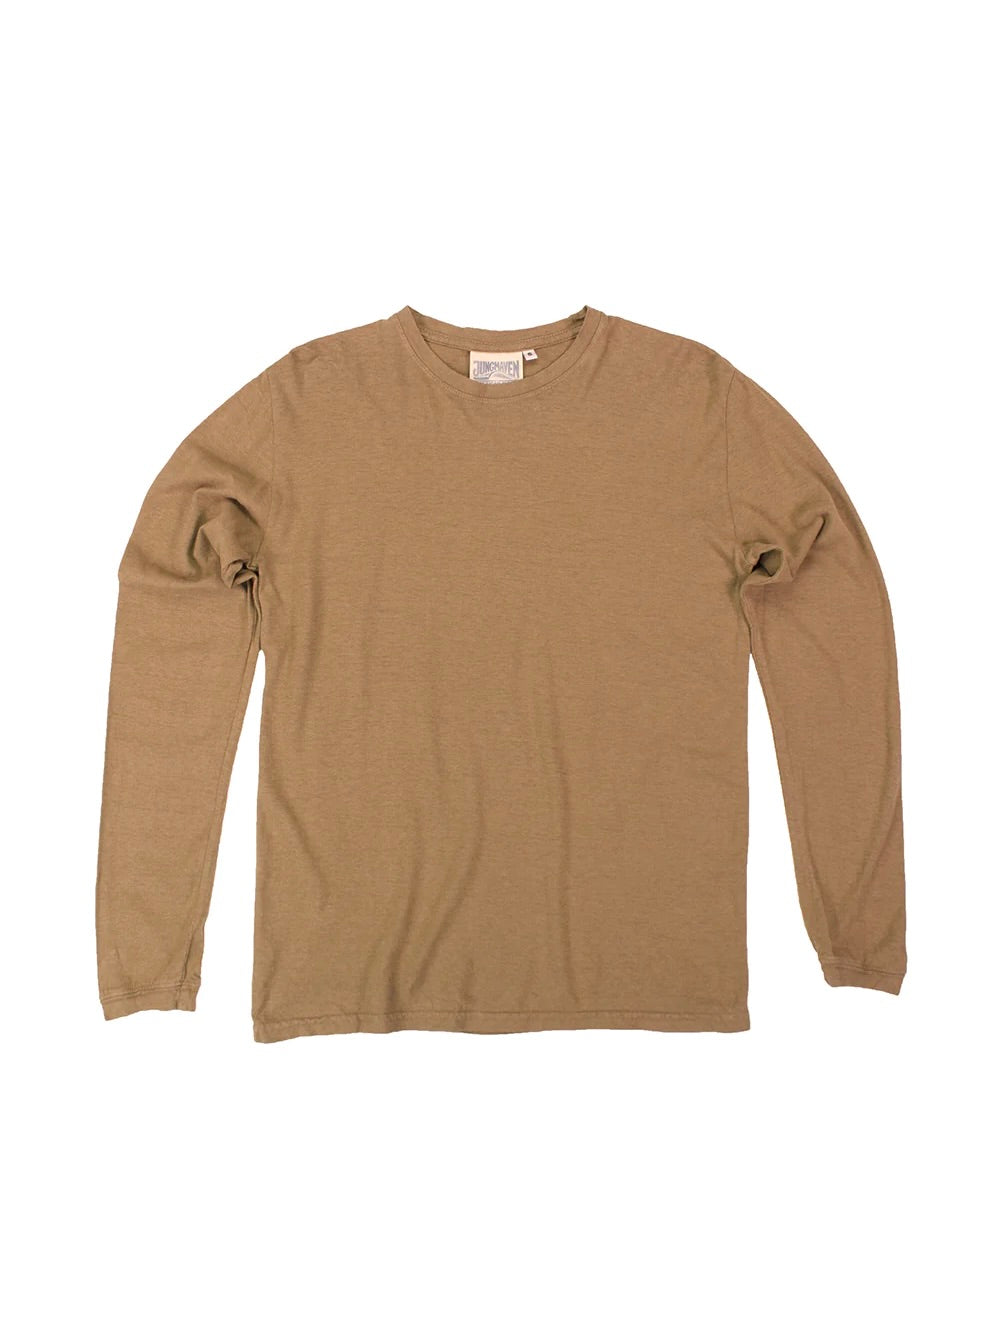 Jung Long Sleeve in Coyote